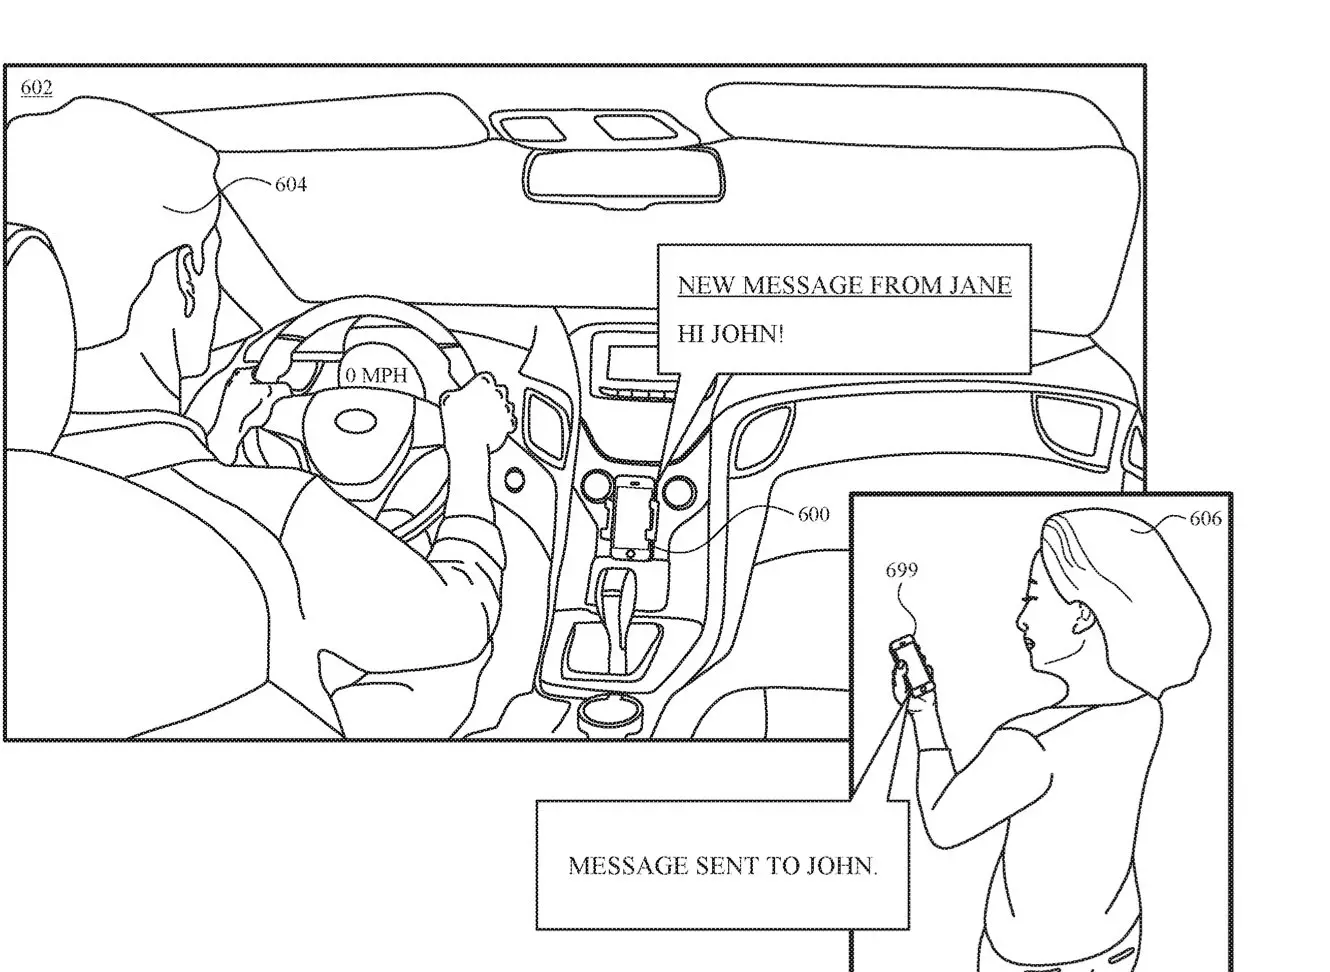 Apple granted patent for an ‘operational safety mode’ for an Apple Car